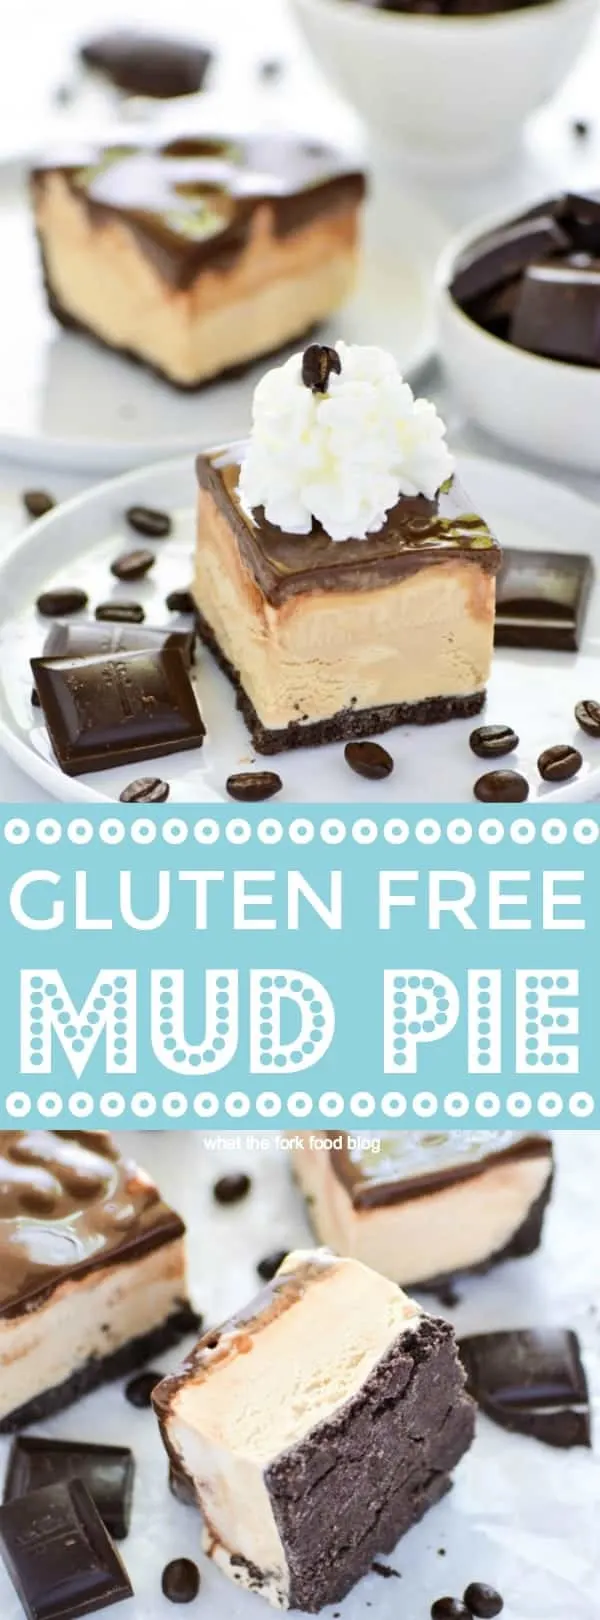 Easy Gluten Free Mud Pie Recipe - not to be confused with Mississippi Mud Pie! This one has a chocolate cookie crust, is filled with coffee ice cream, and coated in hot fudge sauce. Recipe from @whattheforkblog | whattheforkfoodblog.com | gluten free dessert recipes | no bake desserts | summer recipes | ice cream cake | ice cream pie | frozen desserts | Oreo | how to make mud pie